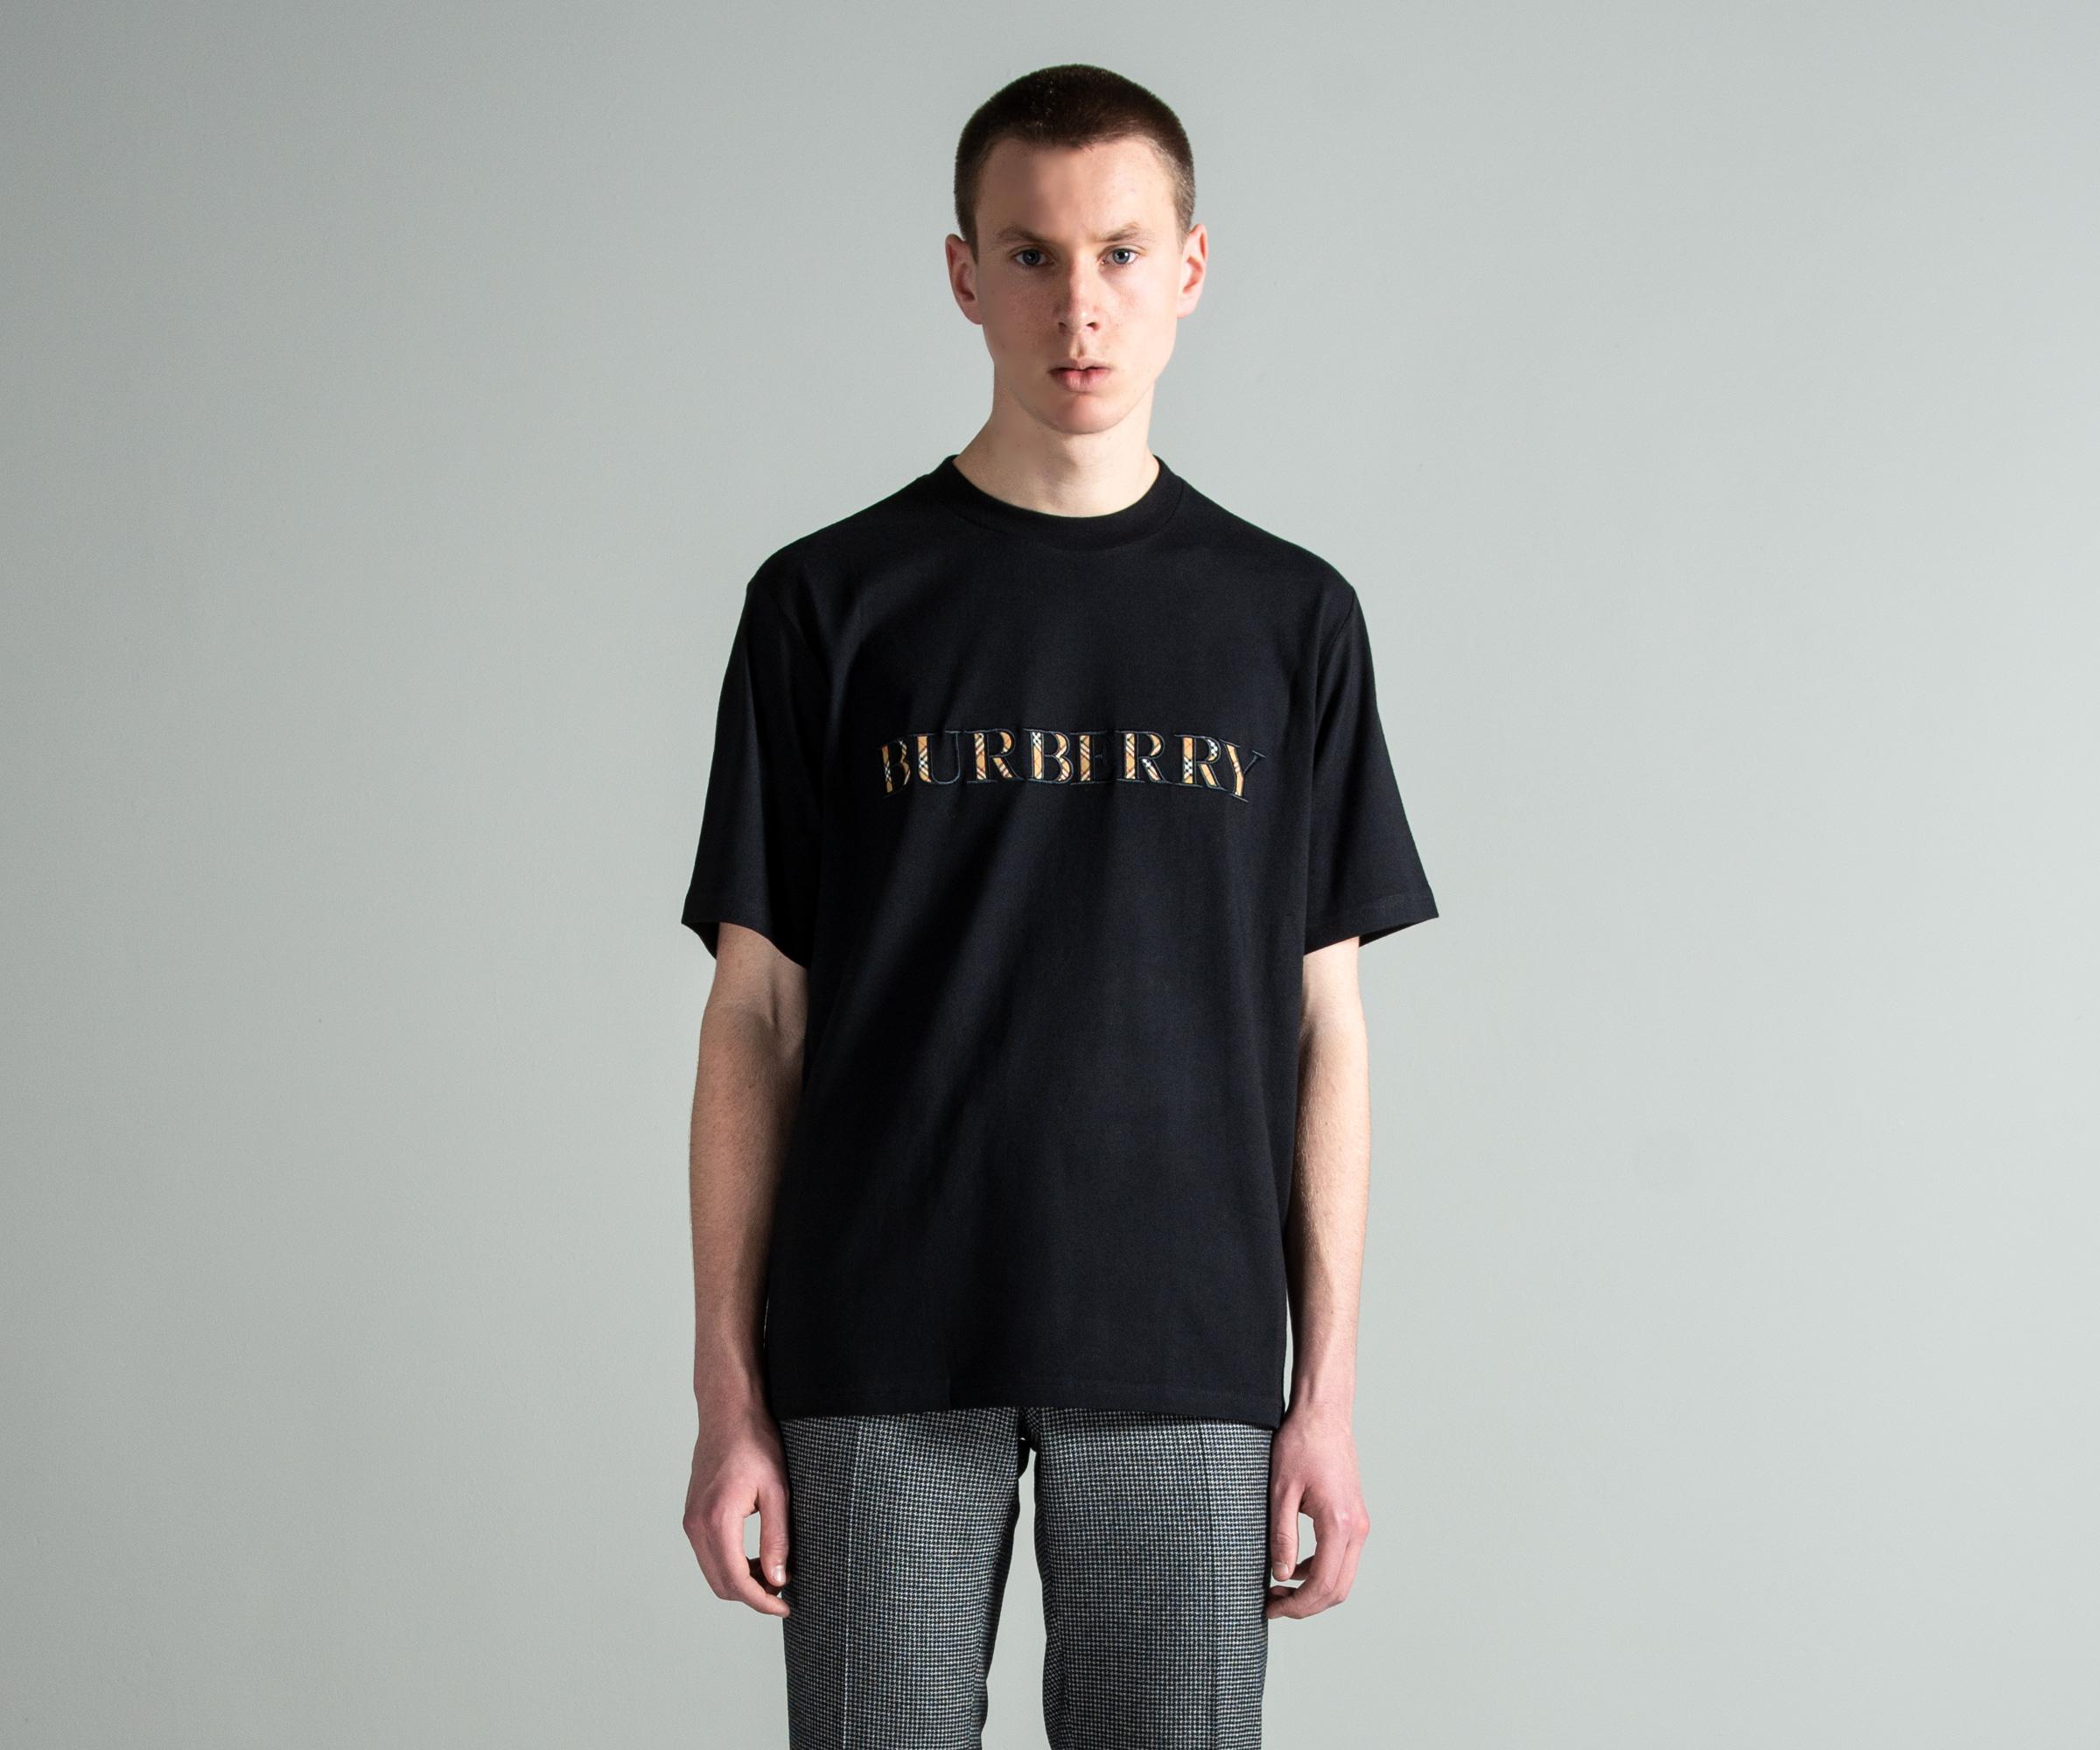 Burberry Check Logo Cotton T-shirt in Black for Men - Lyst